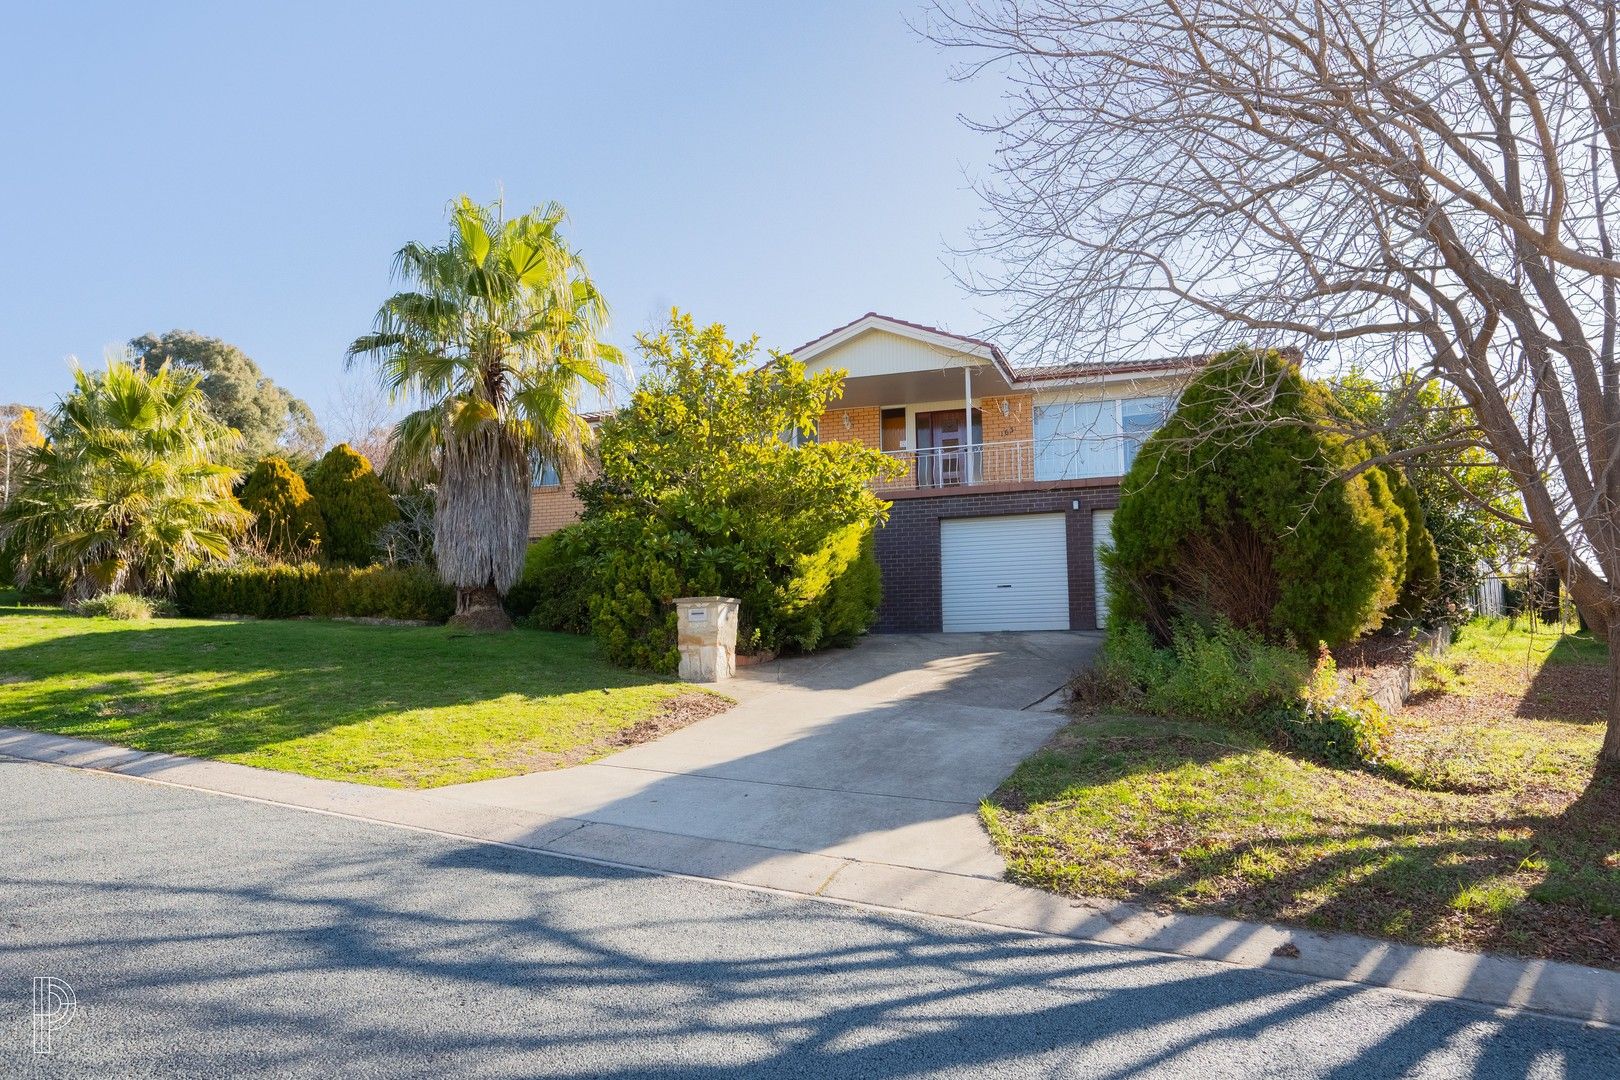 163 Hawkesbury Crescent, Farrer ACT 2607, Image 0